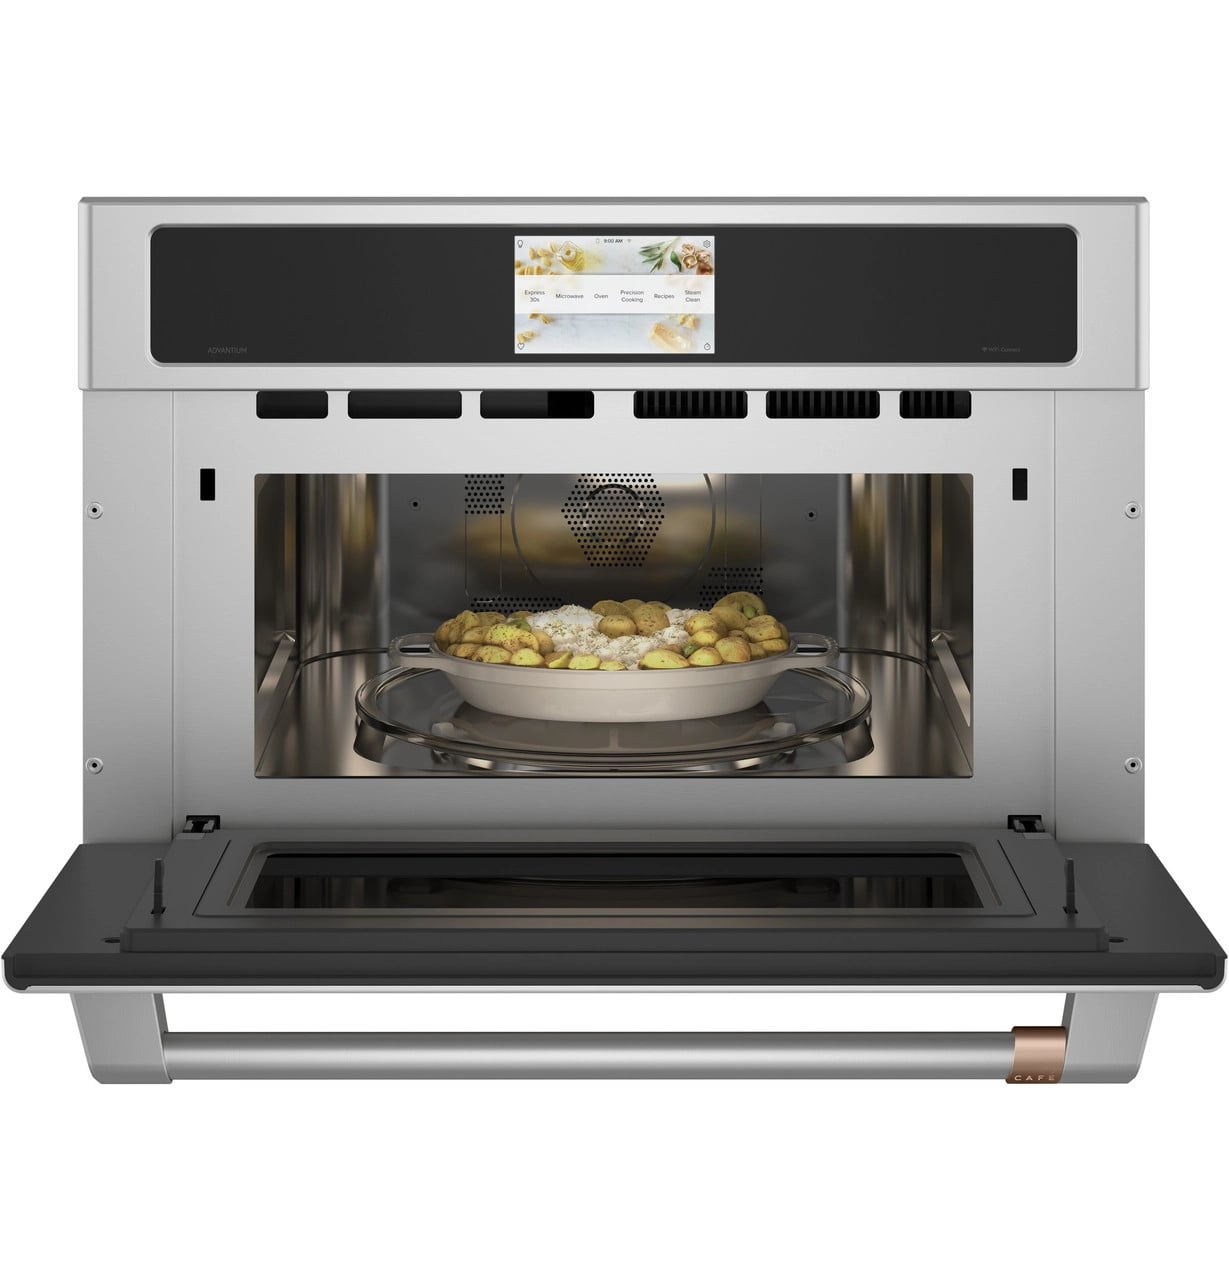 Café - 1.7 cu. ft Single Wall Oven in Stainless - CSB913P2NS1